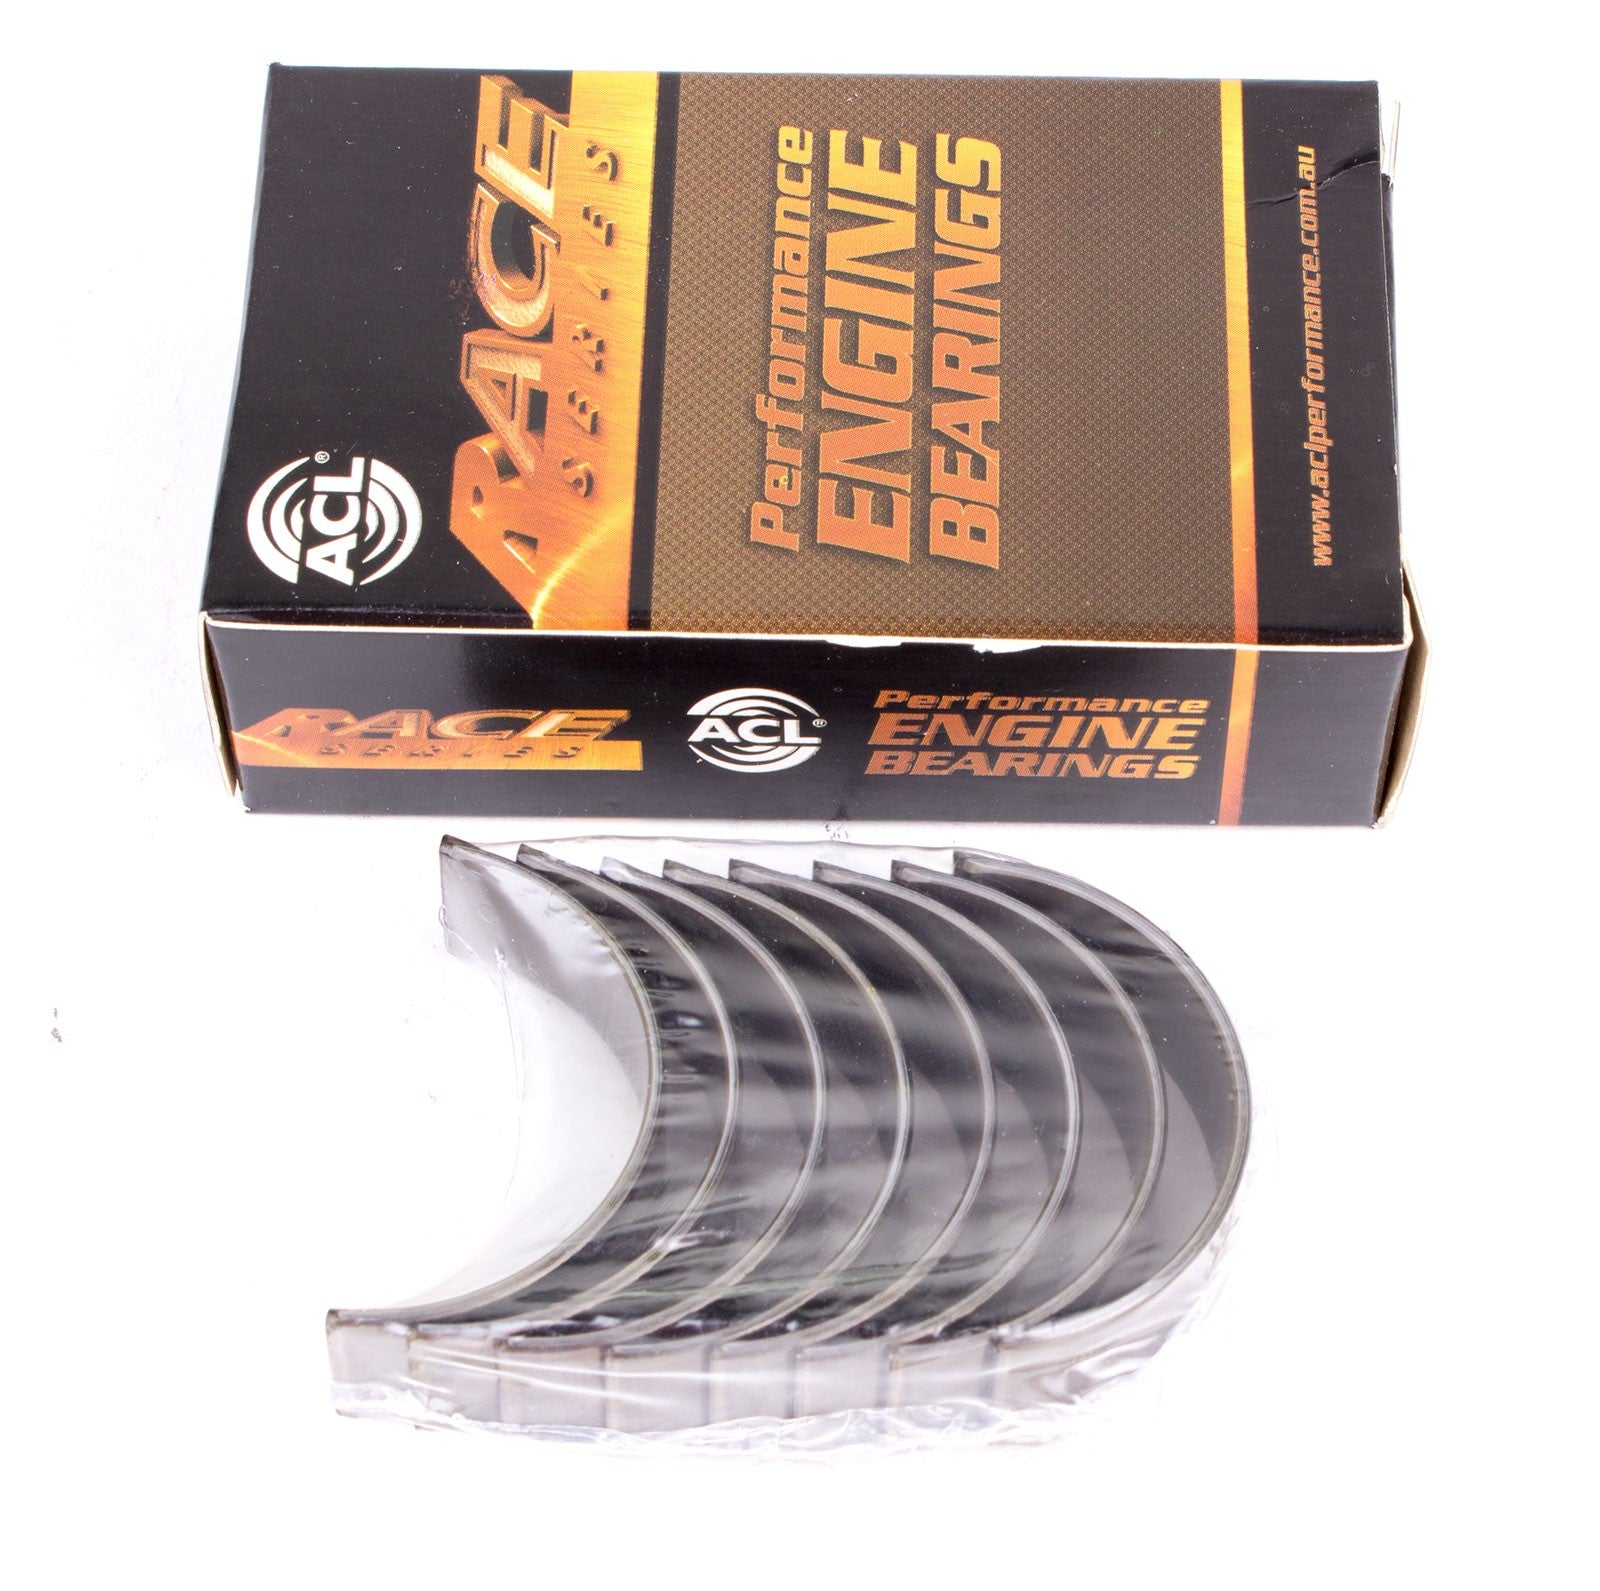 ACL 5M2797H-.30 Main bearing set (ACL Race Series) Photo-0 